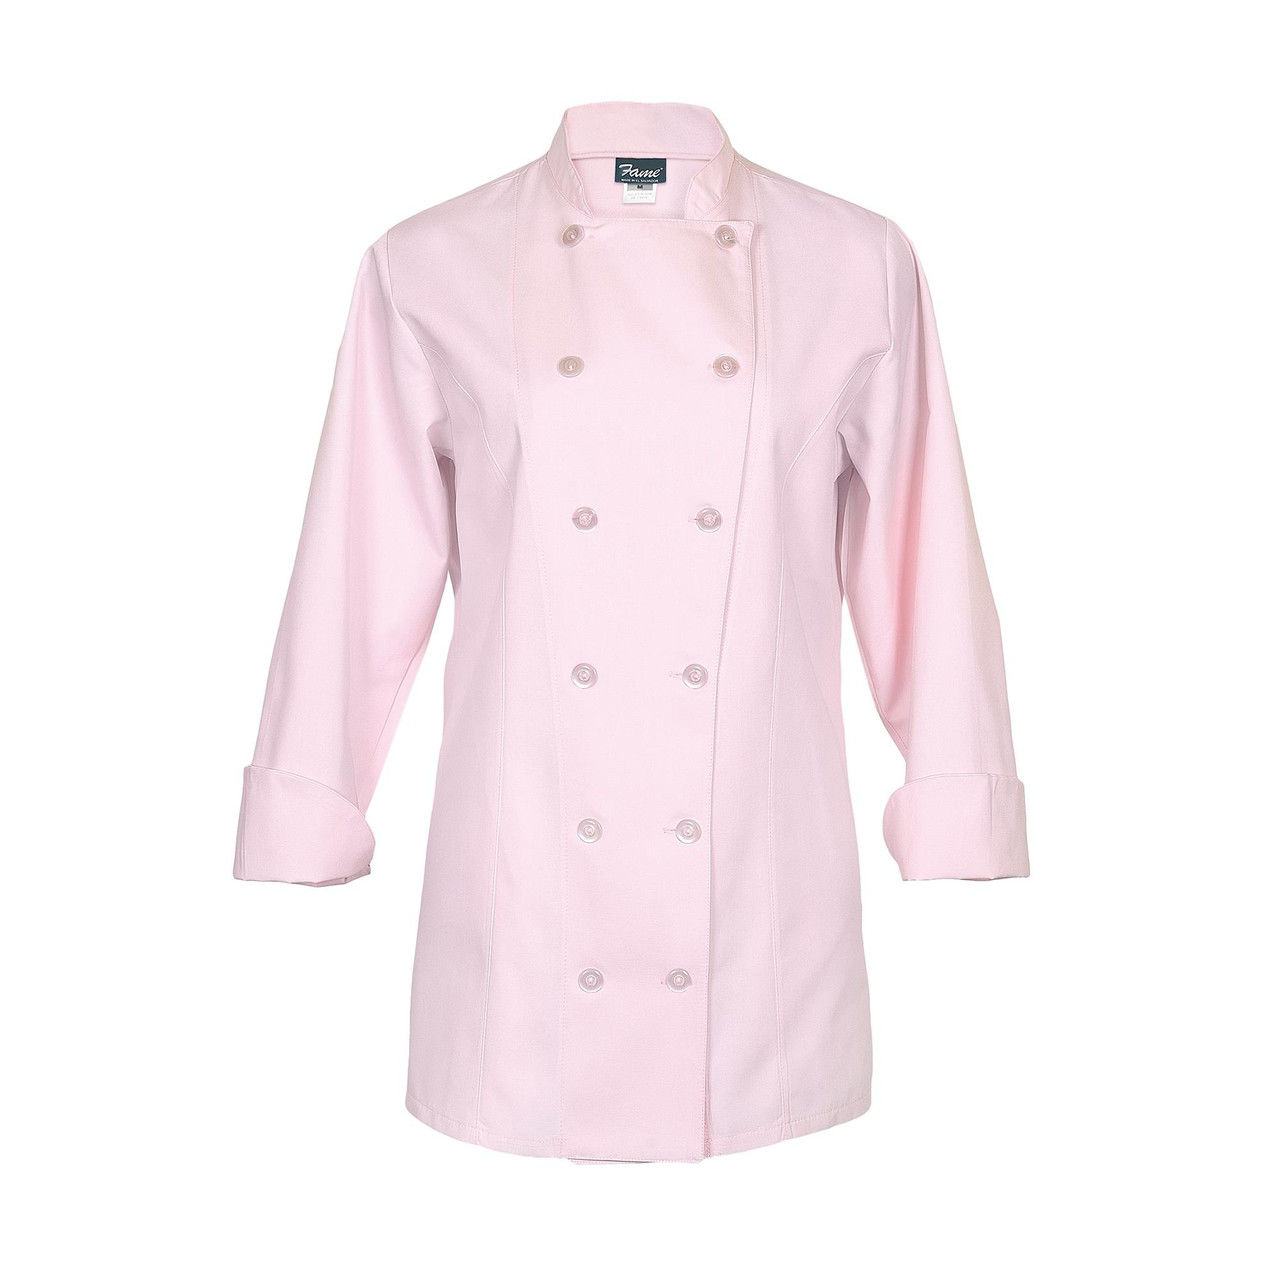 Are these chef coats comfortable for long hours in the kitchen?